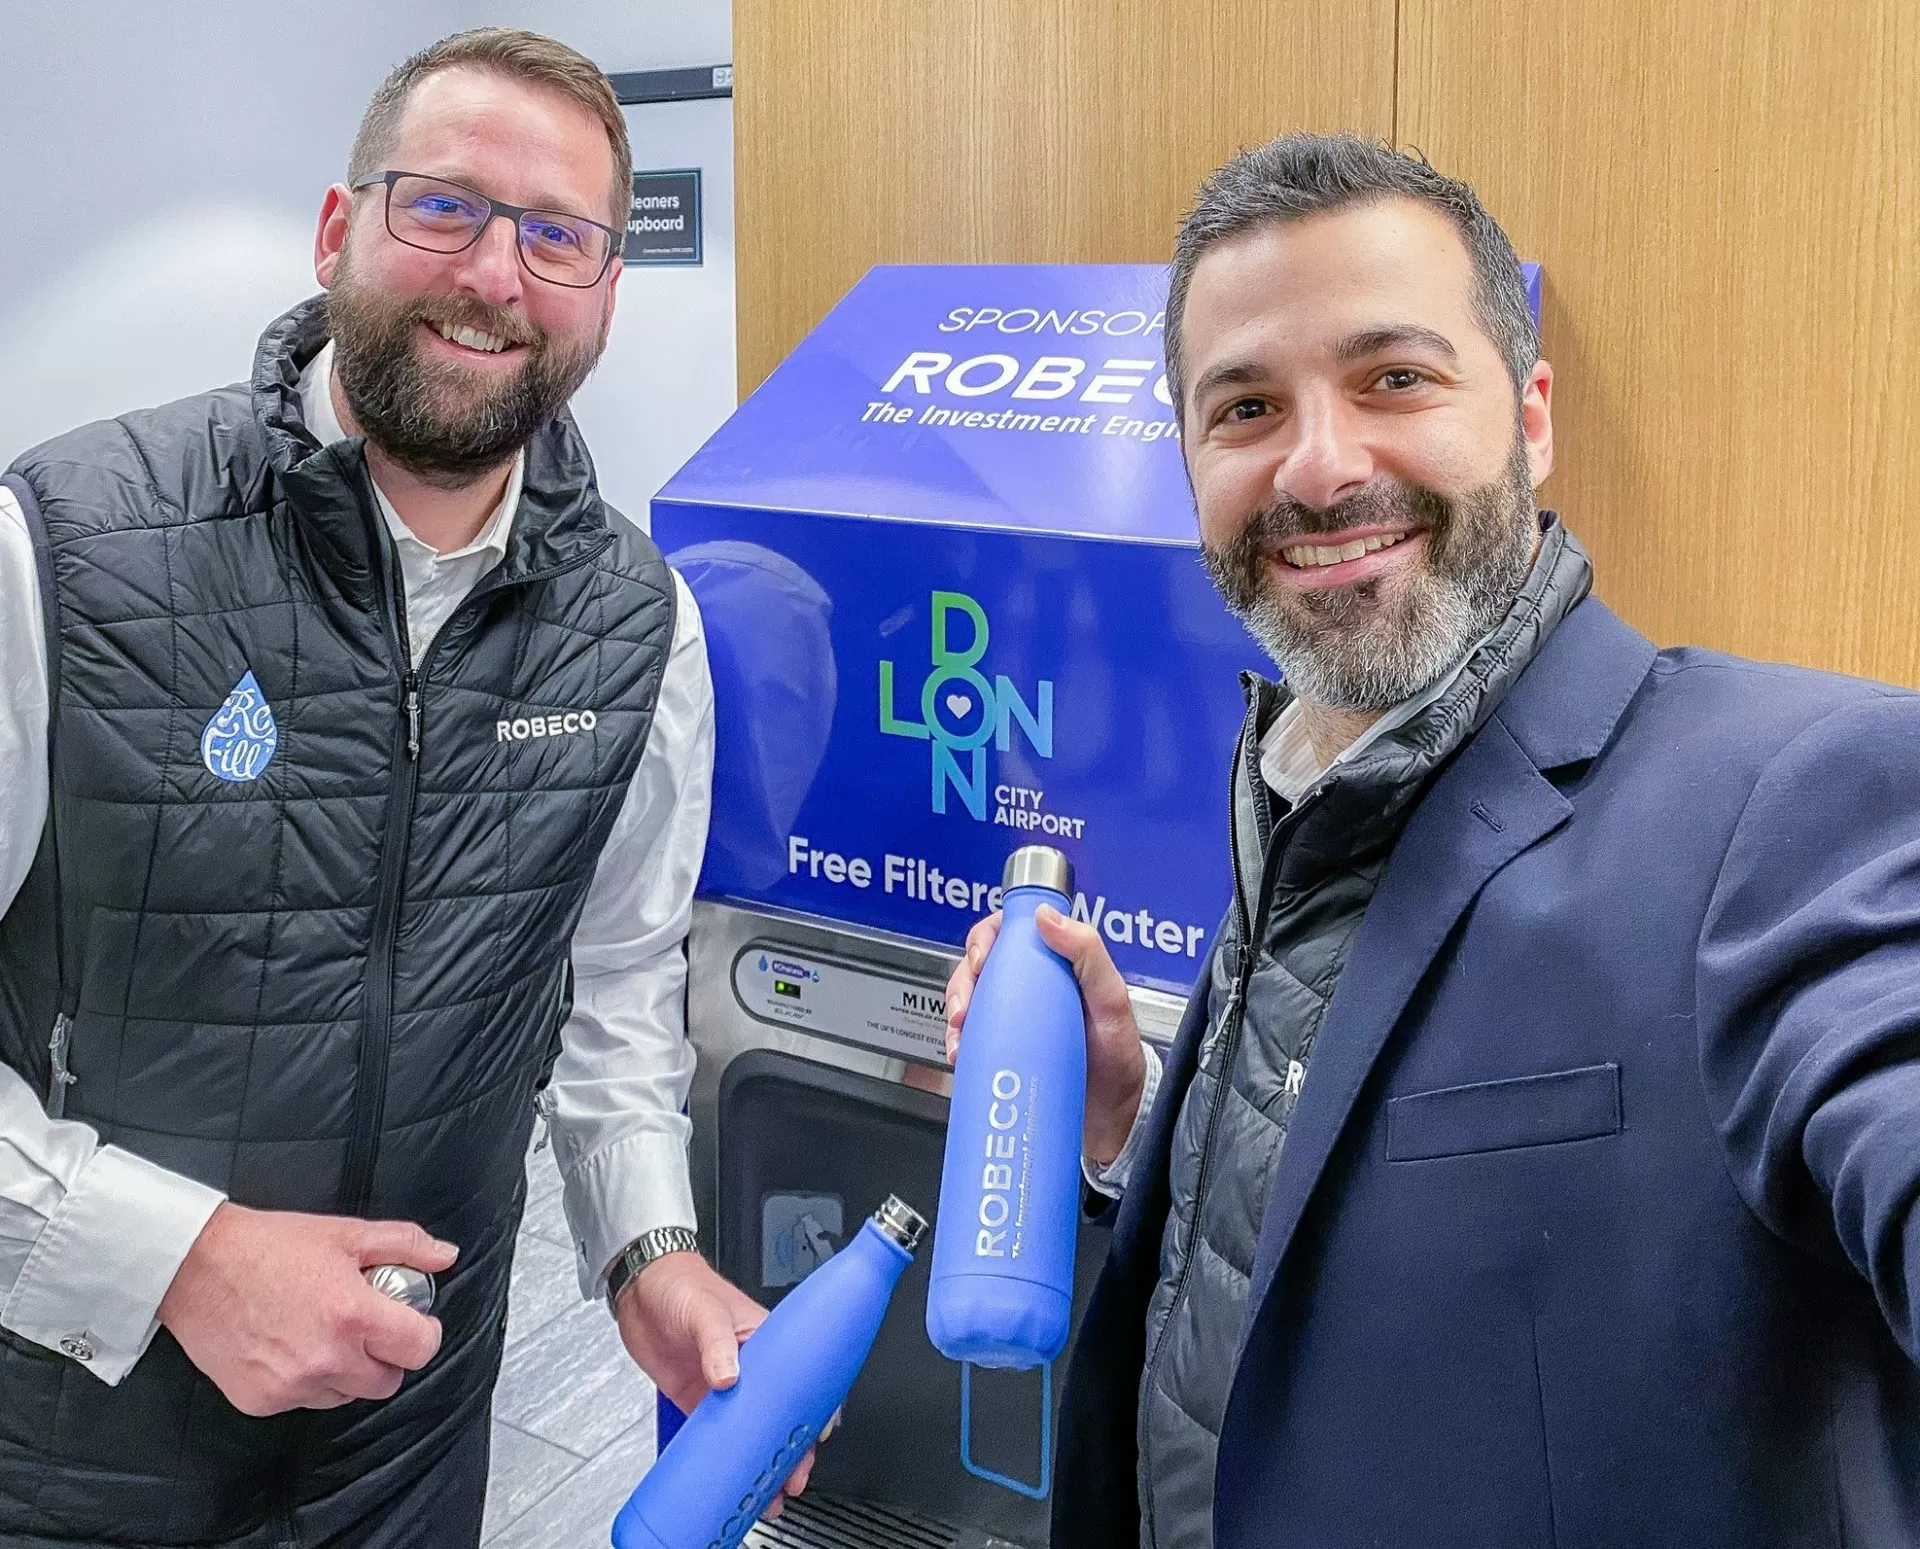 Happy People Refilling From The New Branded Bottle Filling Station At The Airport